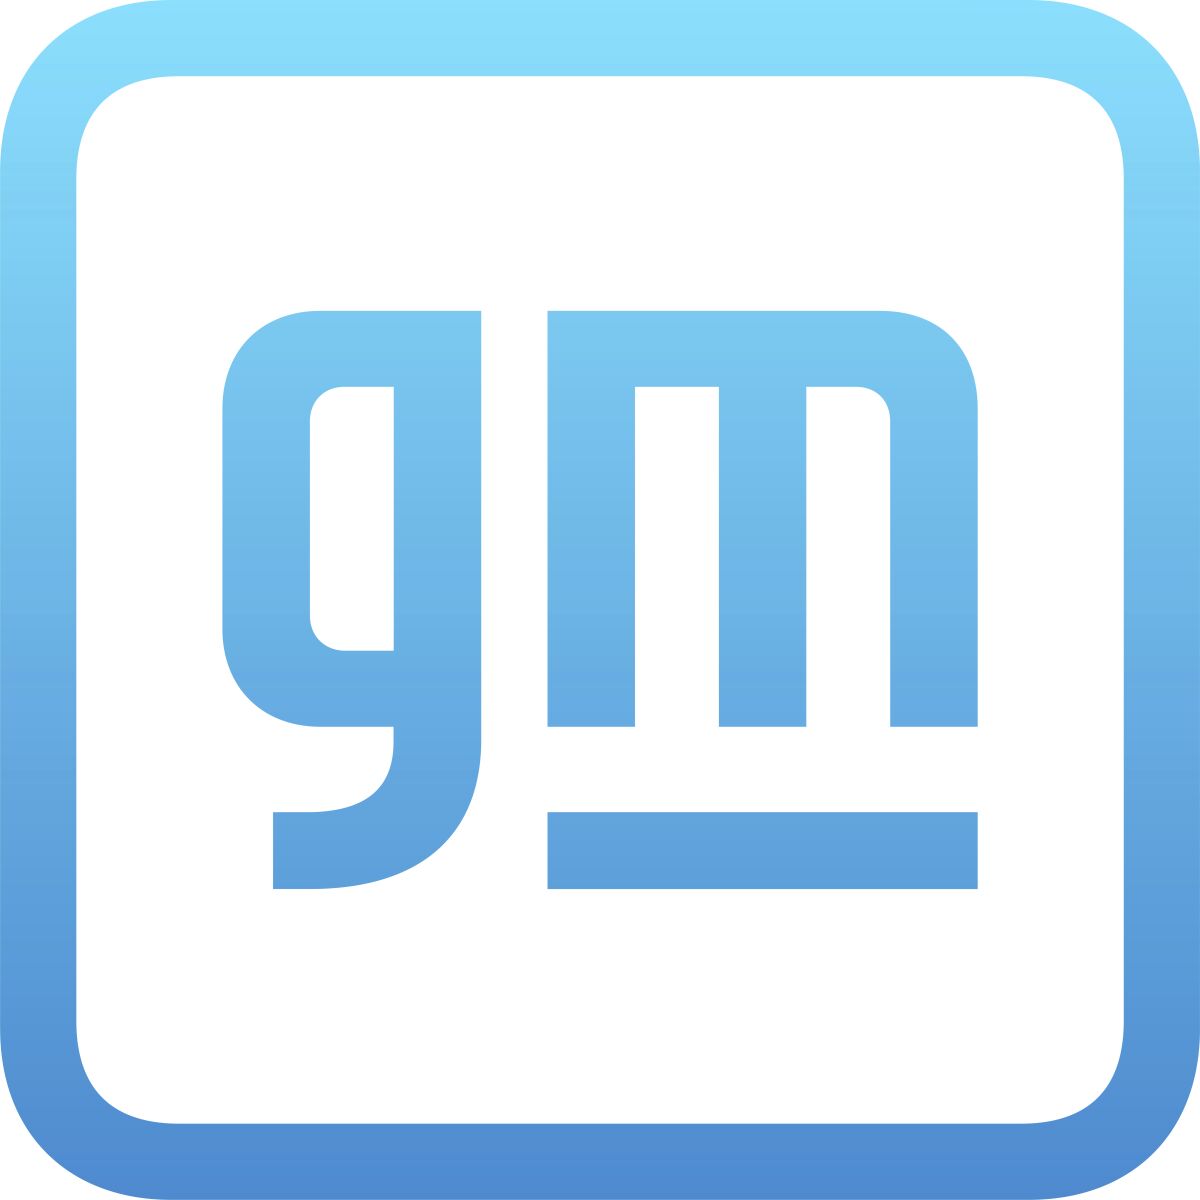 This image provided by General Motors shows the GM Logo. General Motors and Honda are planning to codevelop some affordable electric vehicles that will use next-generation Ultium battery technology. The vehicles, which will include a compact crossover, are expected to begin going on sale in North America in 2027. (General Motors via AP)